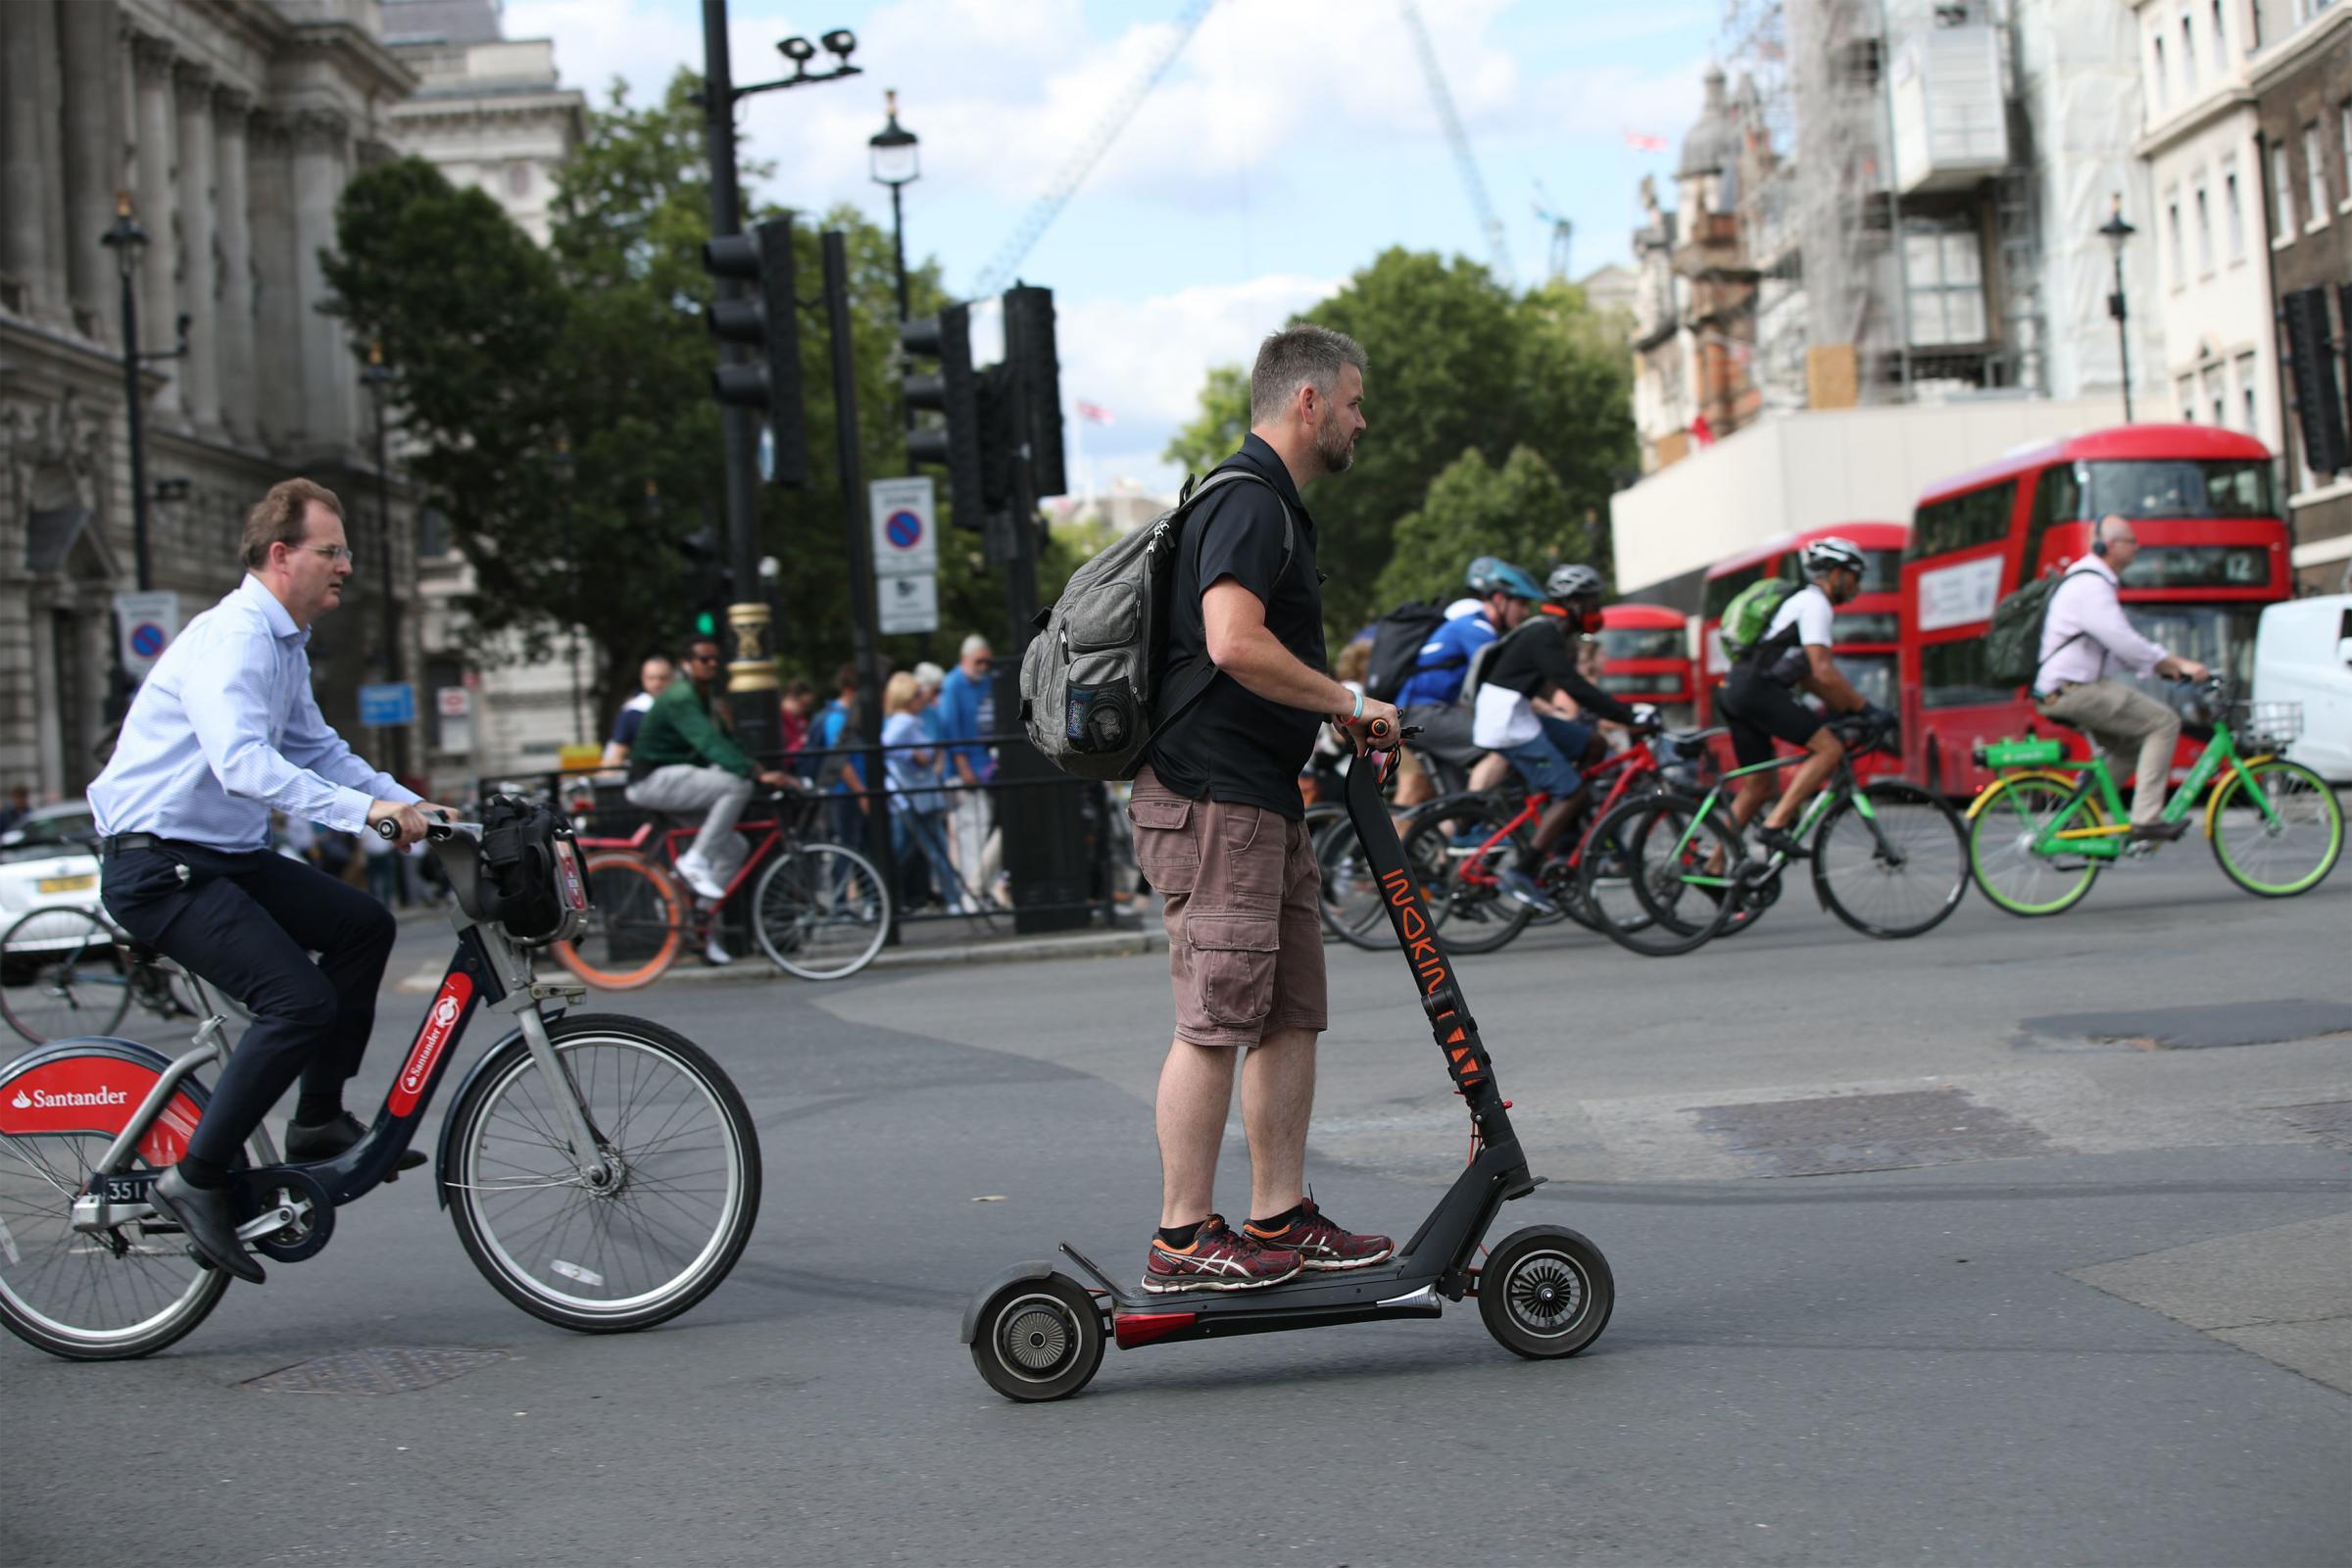 E-scooter trial scheme launches in London in June